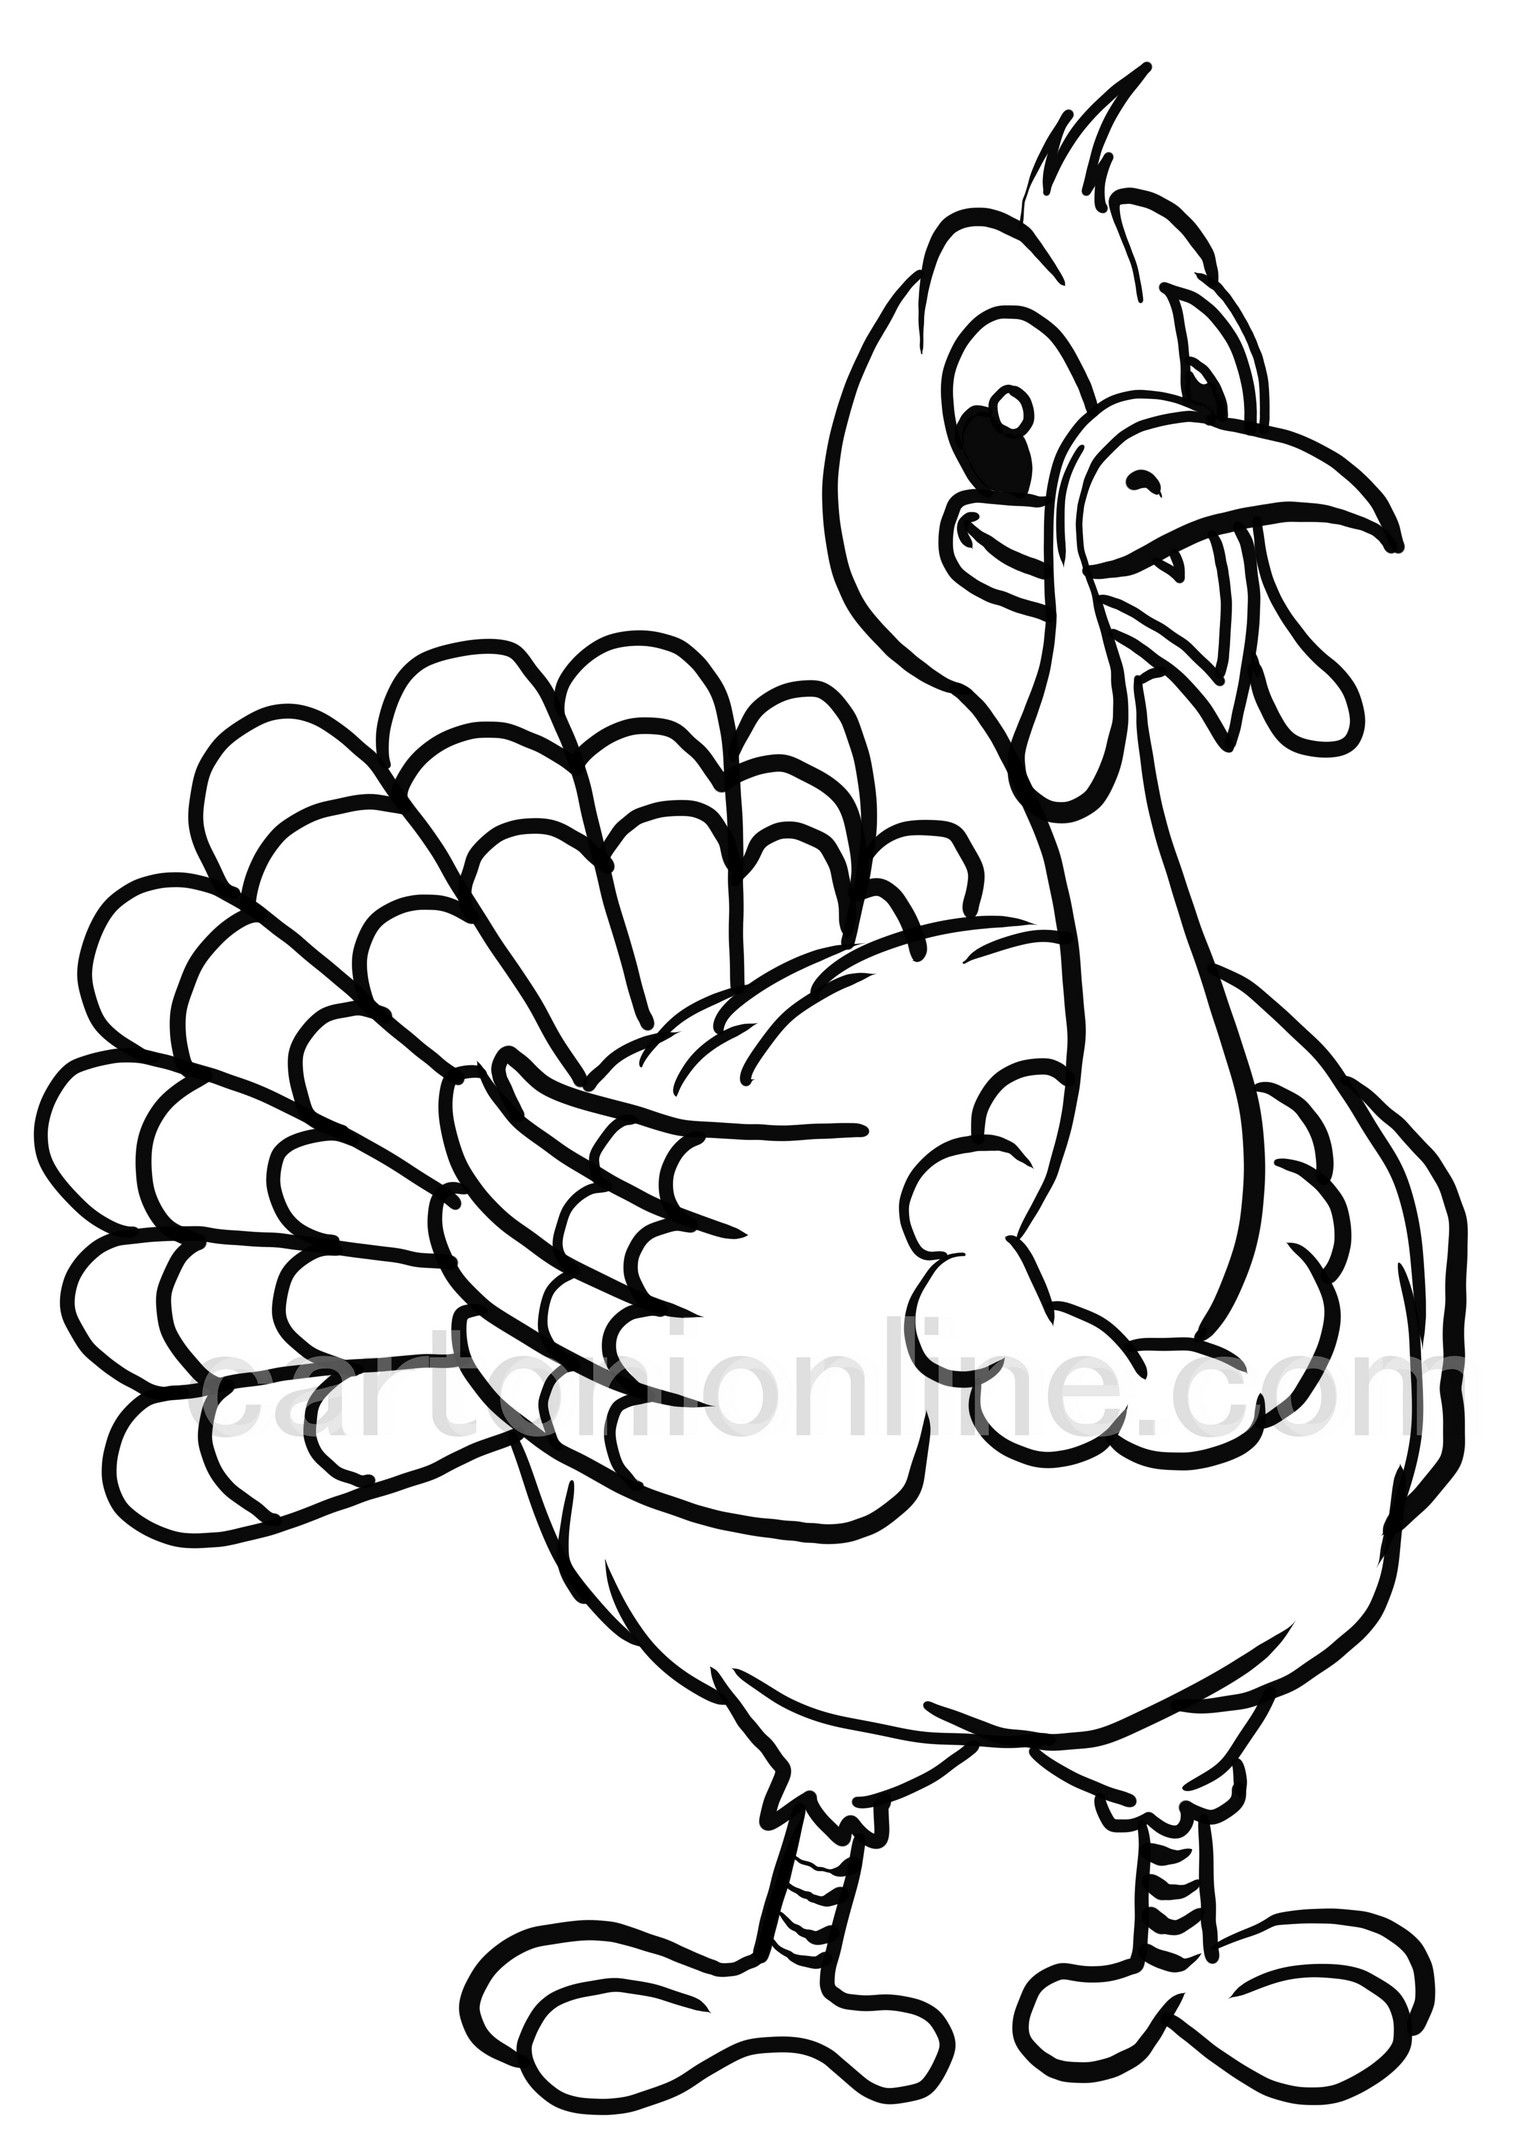 Realistic Turkey coloring page